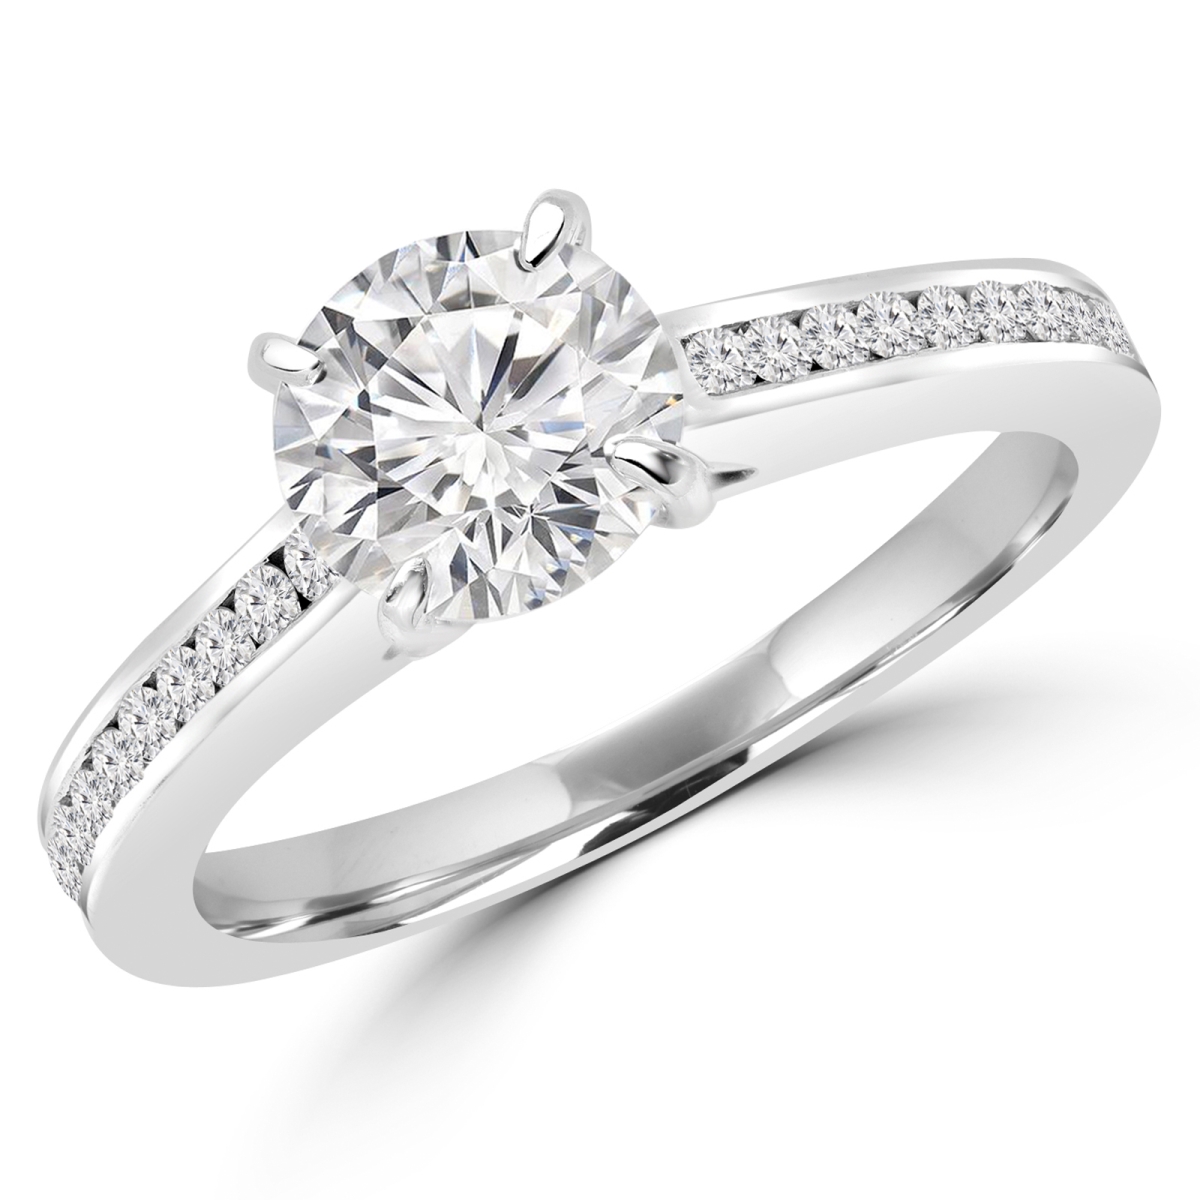 MD180237-7.25 0.6 CTW Round Diamond Solitaire with Accents Engagement Ring in 14K White Gold with Channel Set Accents - Size 7.25 -  Majesty Diamonds